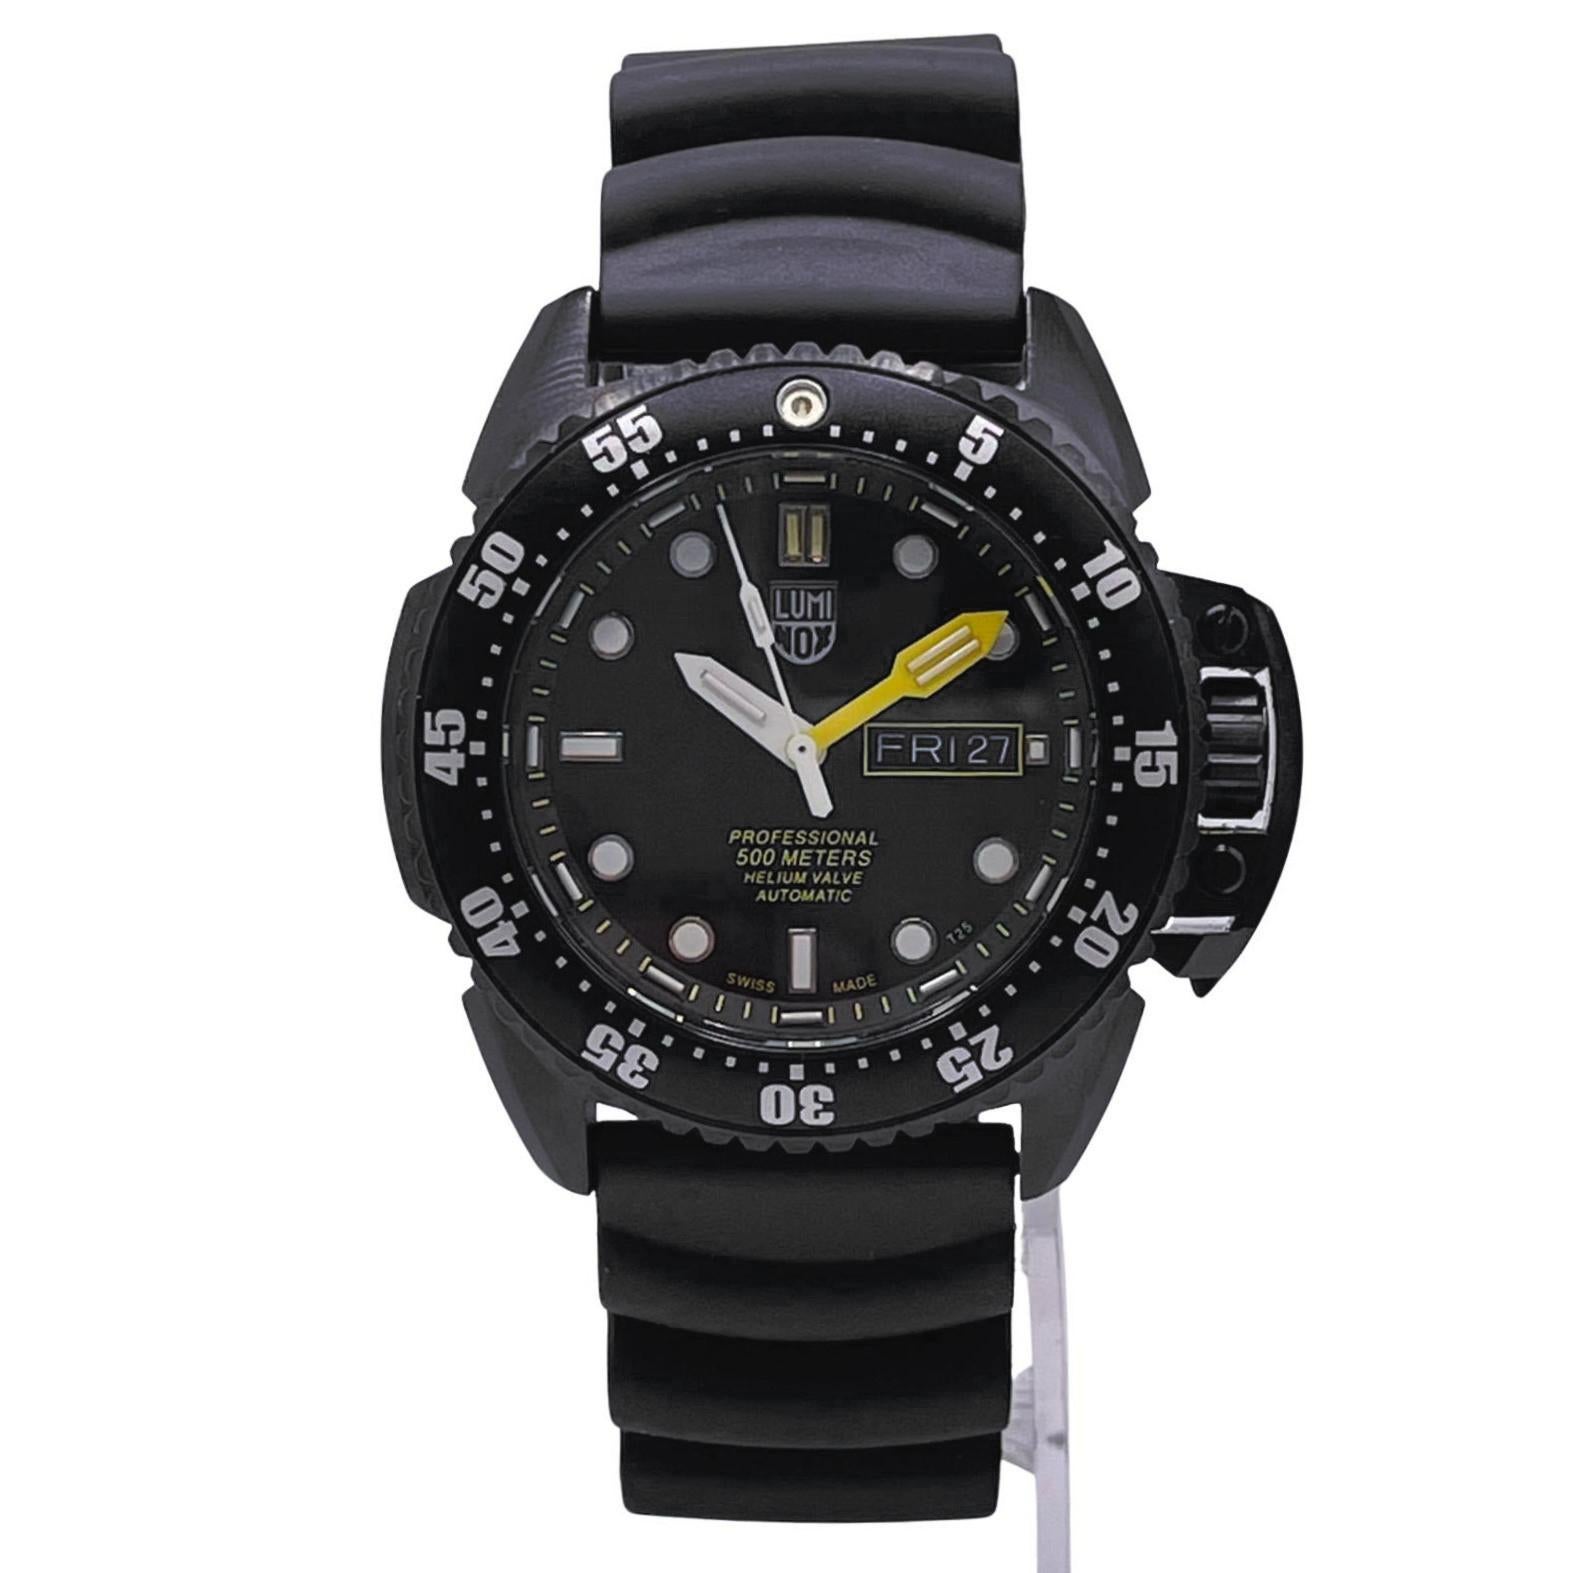 Display model Luminox Deep Dive Men's Watch XS.1521. The Watch has insignificant marks on the Bezel and Case from Storing. This Timepiece is Powered by Mechanical (Automatic) Movement and features: PVD Coated Stainless Steel Case with a Black Rubber